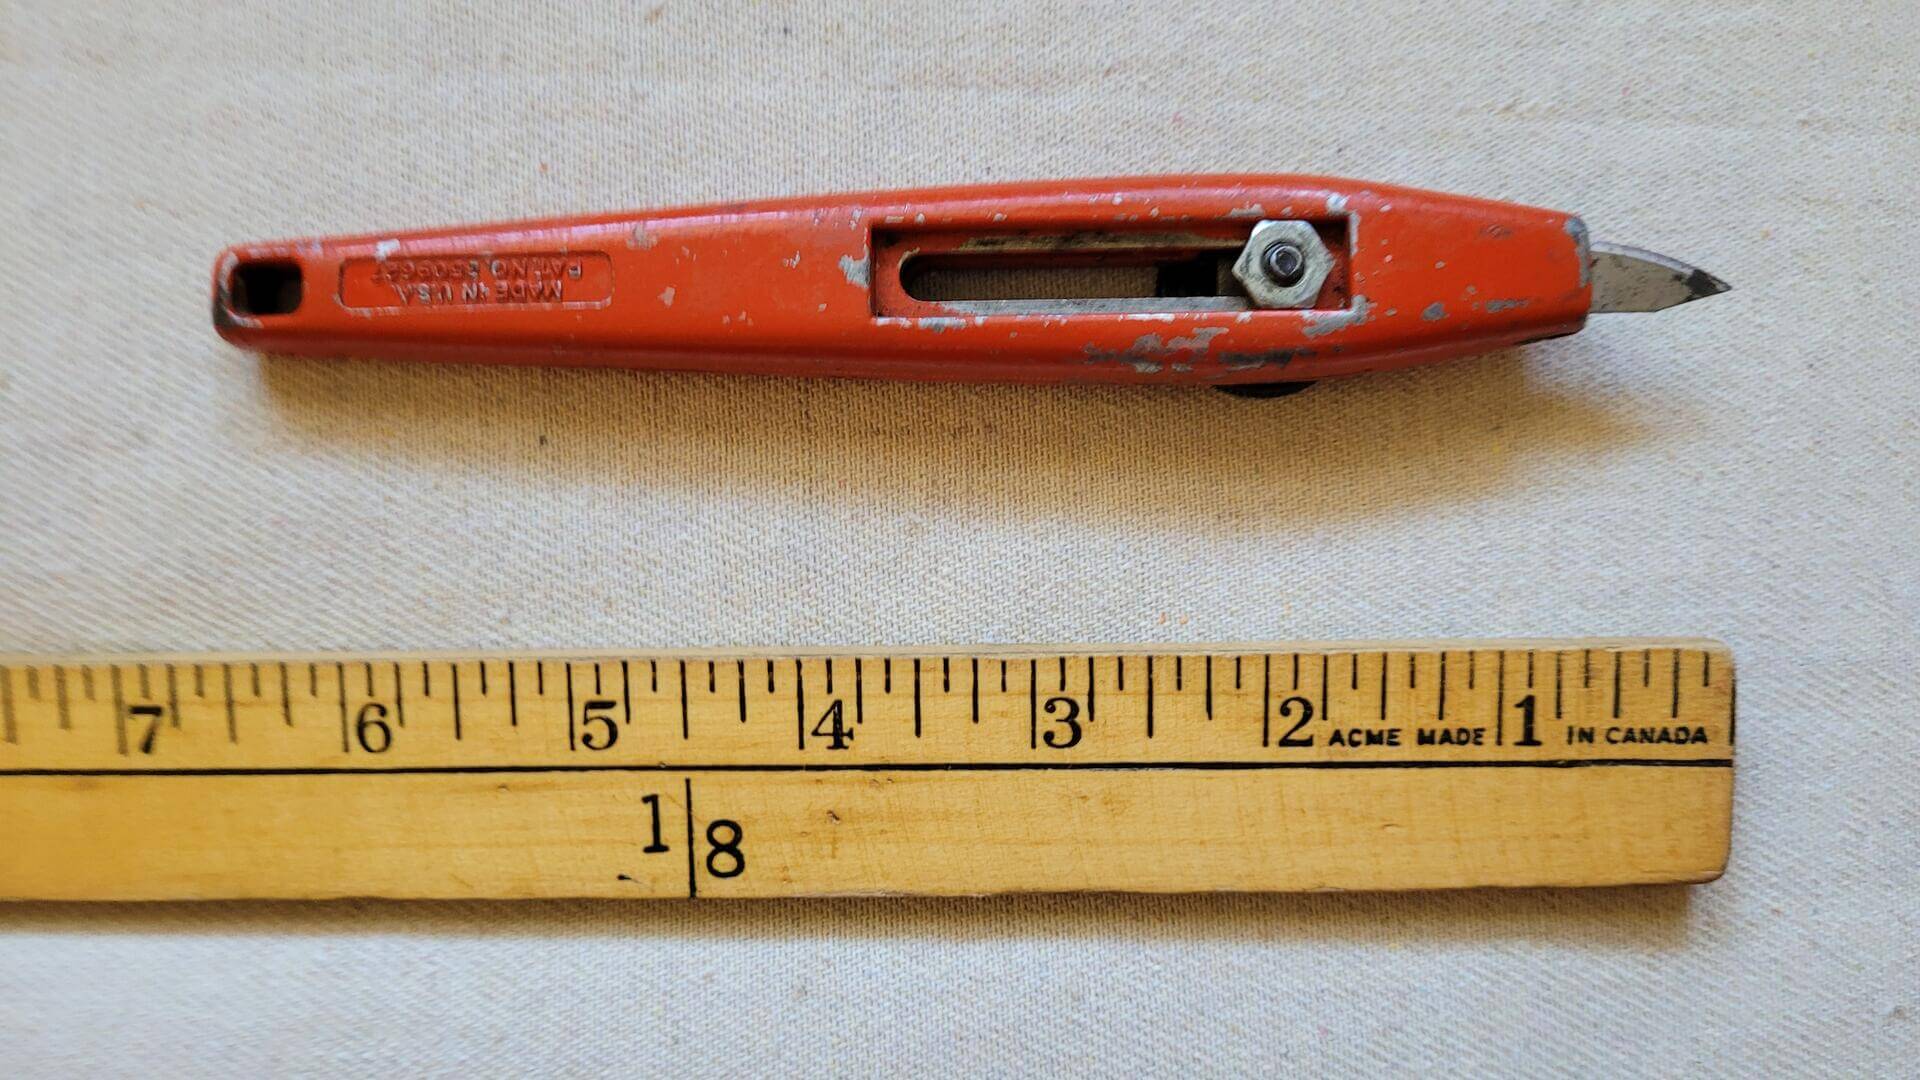 Retro 1970s Stanley Tools orange cast steel "Slimknife" No. 28-108 retractable blade utility knife cutter - Antique and vintage made in USA collectible cutting tool